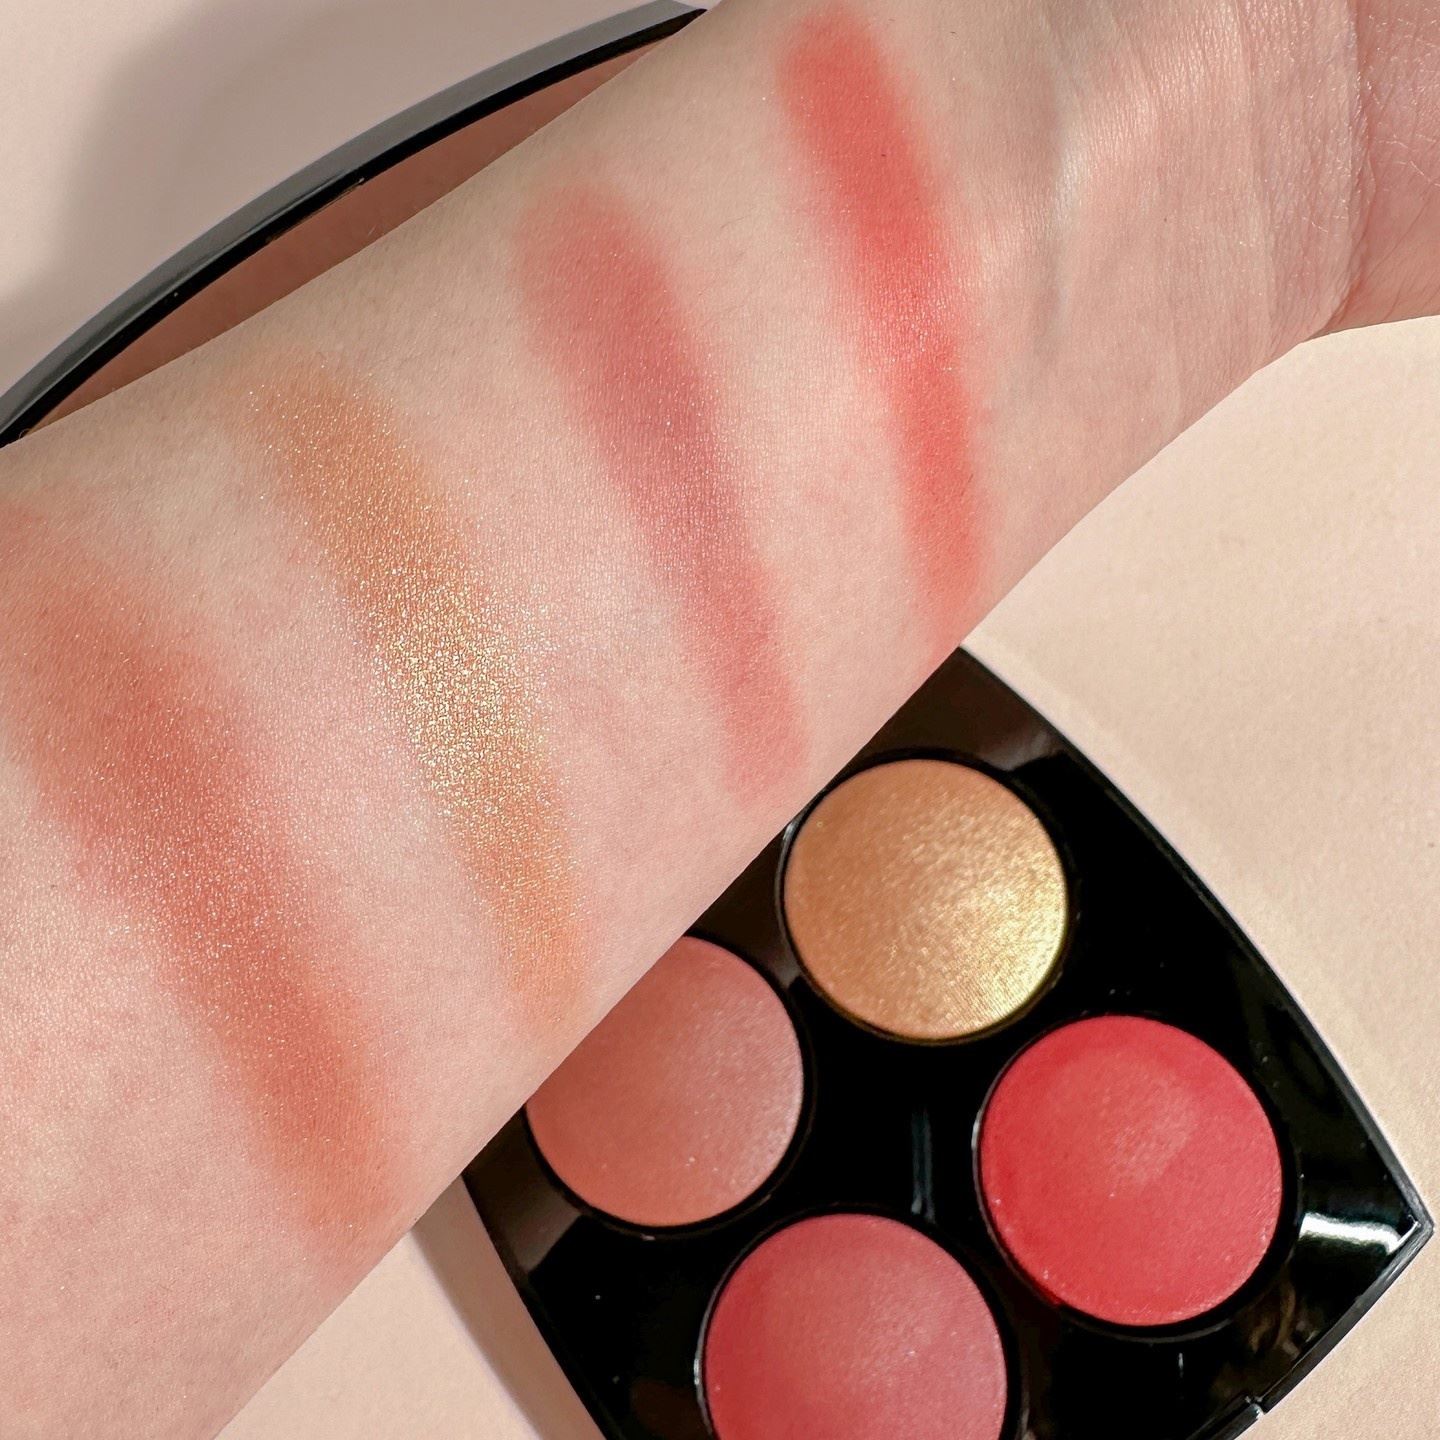 Chanel Les 4 Rouges Yeux Et Joues Eyeshadow and Blush Palette Spring Summer 2023 - Swatches